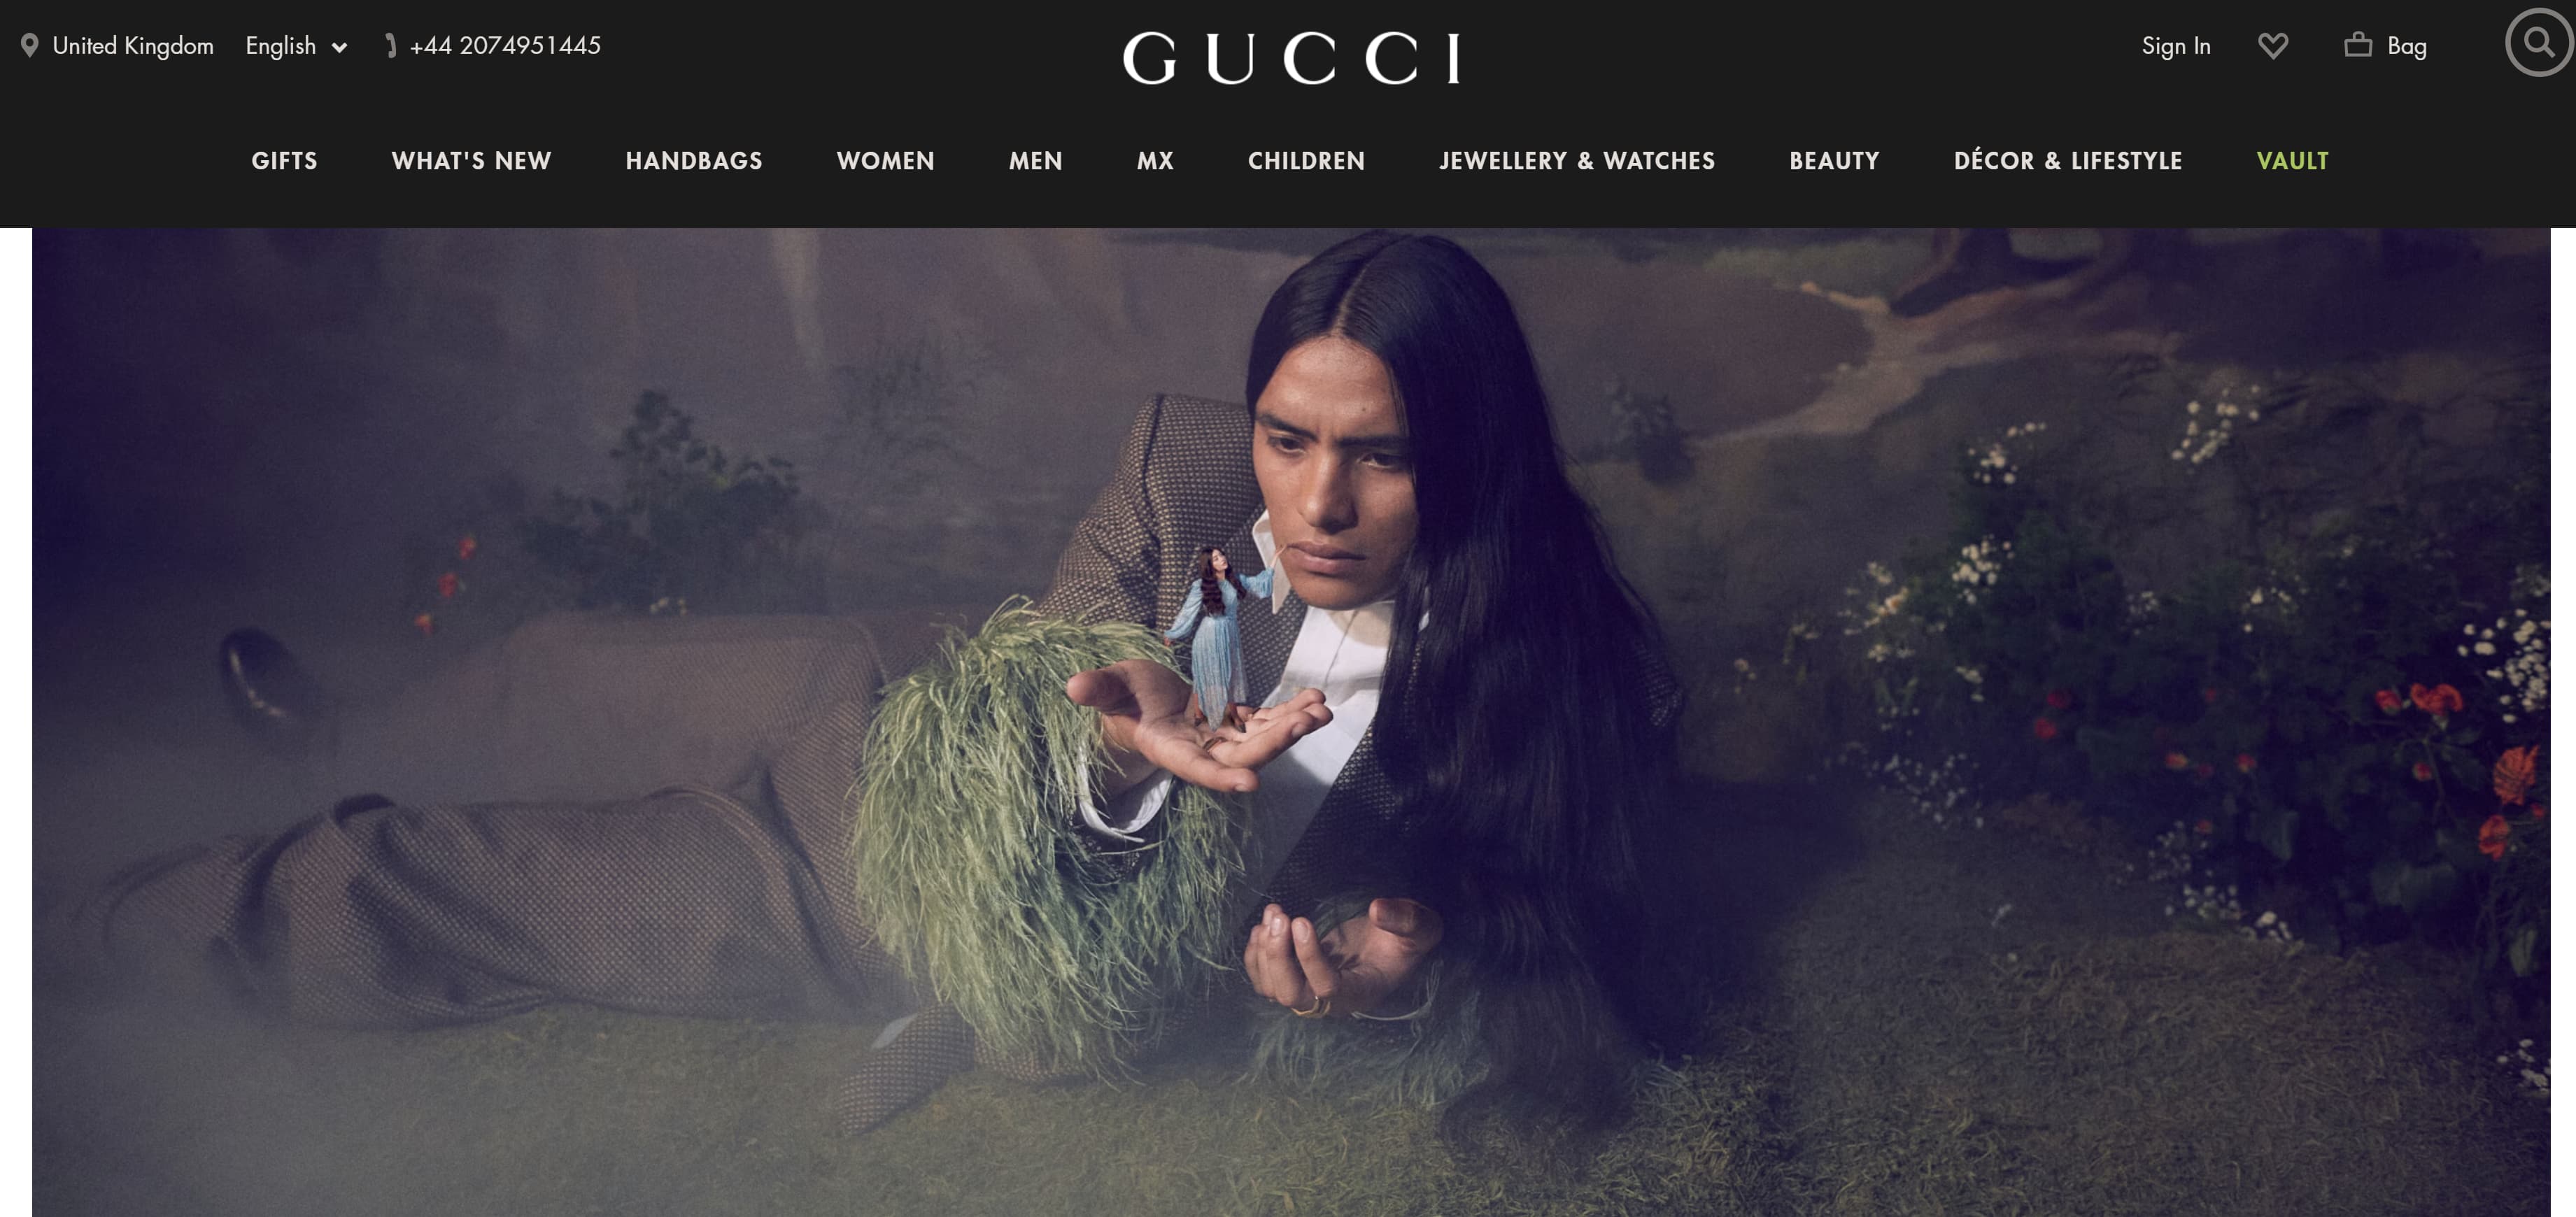 gucci.jpg?width=3682&height=1740&name=gucci - 20 Valentine&#039;s Day Marketing Campaigns We Love